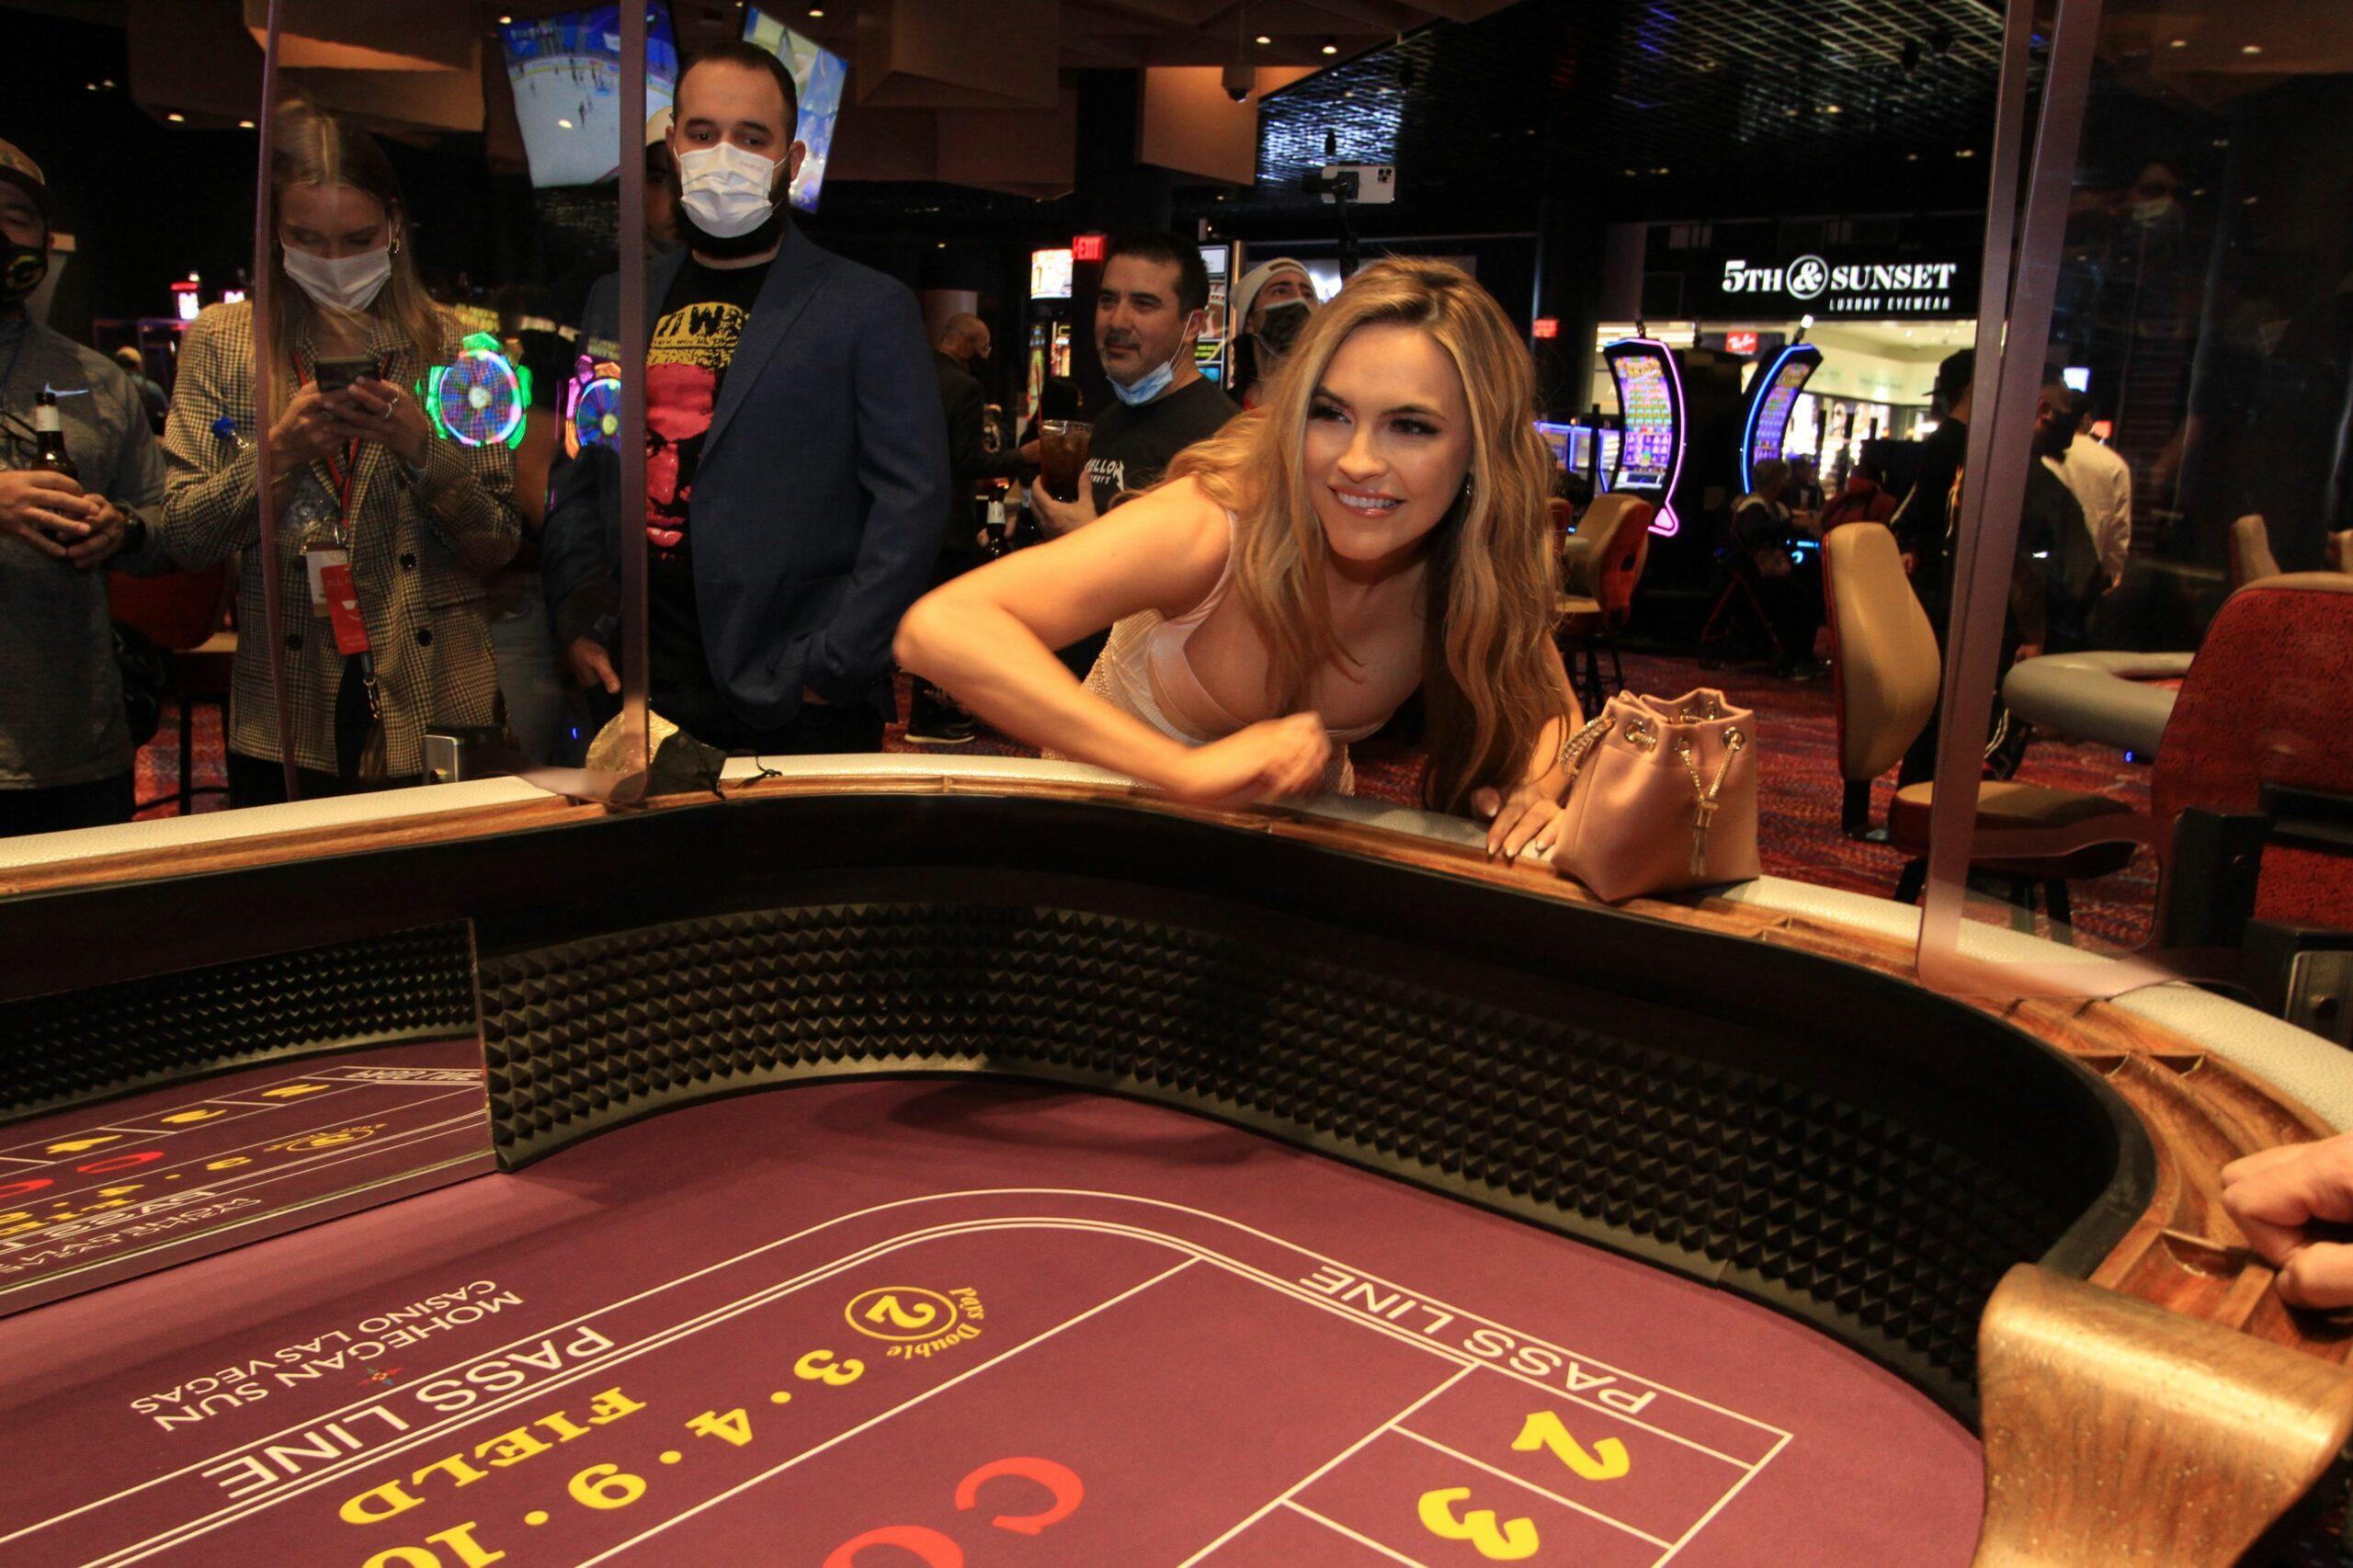 Mario Lopez and Chrishell Stause hit the tables at the opening of 200 million Virgin Hotels Las Vegas on March 25 2009 in Las Vegas Nevada the former iconic Hard Rock Hotel